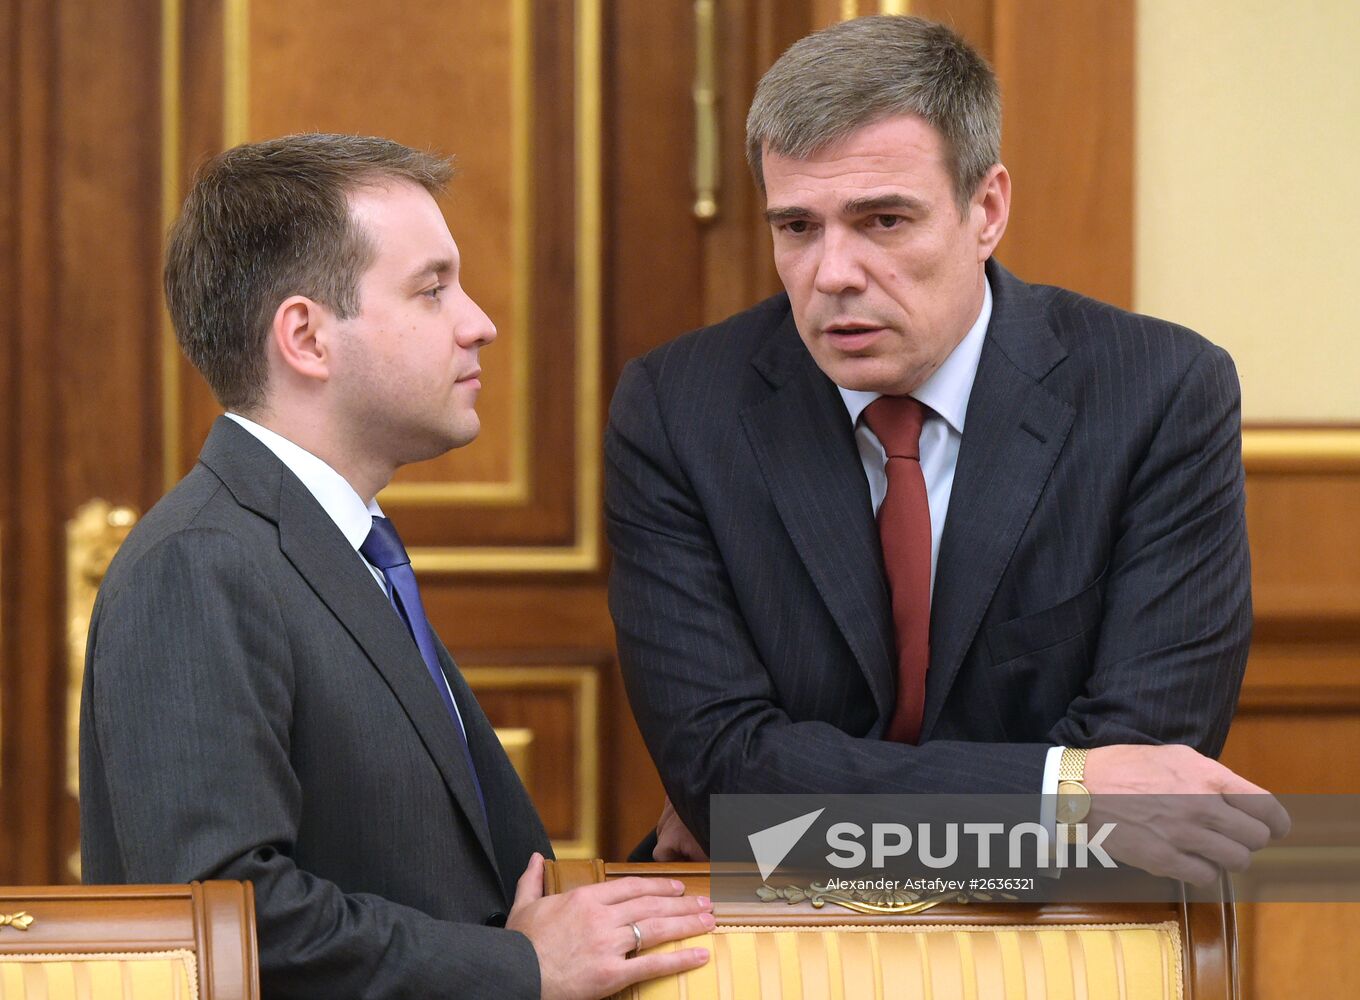 Russian Prime Minister Dmitry Medvedev chairs Government meeting